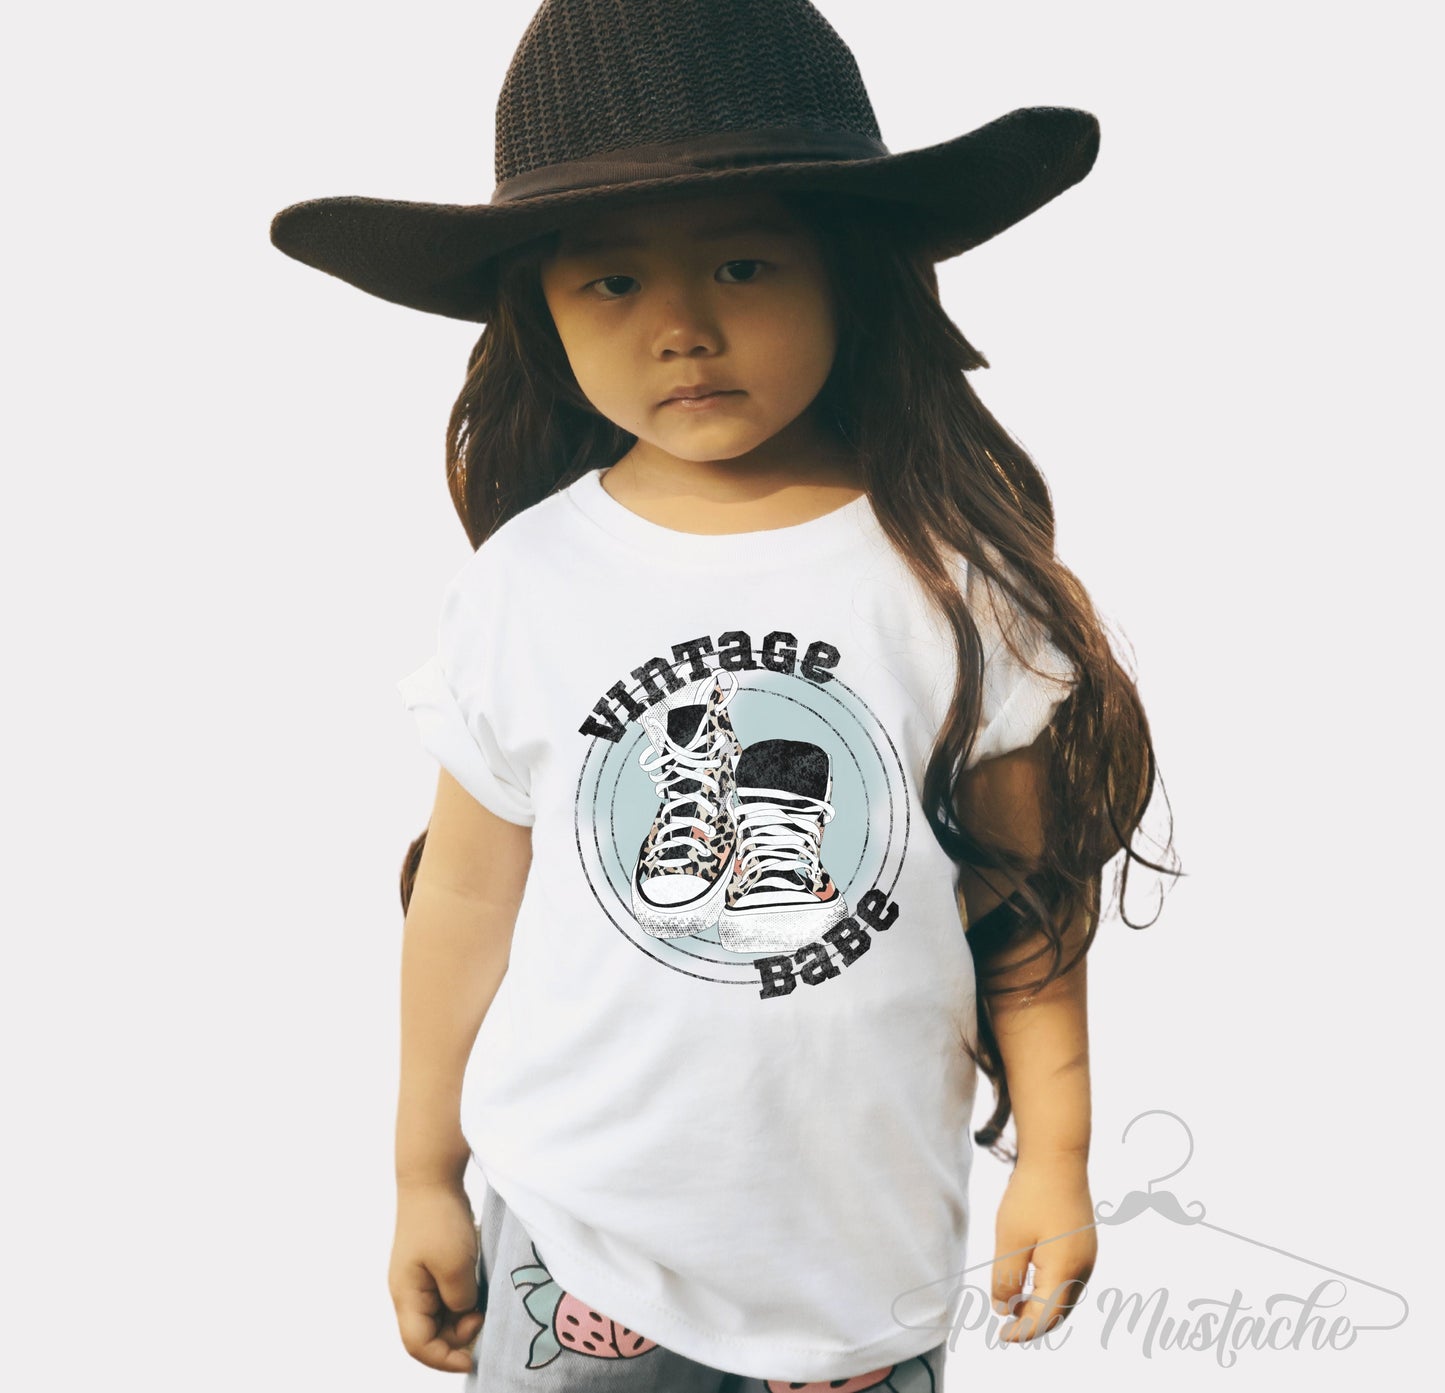 Vintage Babe Soft Style Tee/ Fun Retro Tee/ Toddler, Youth, and Adult Sizes Available